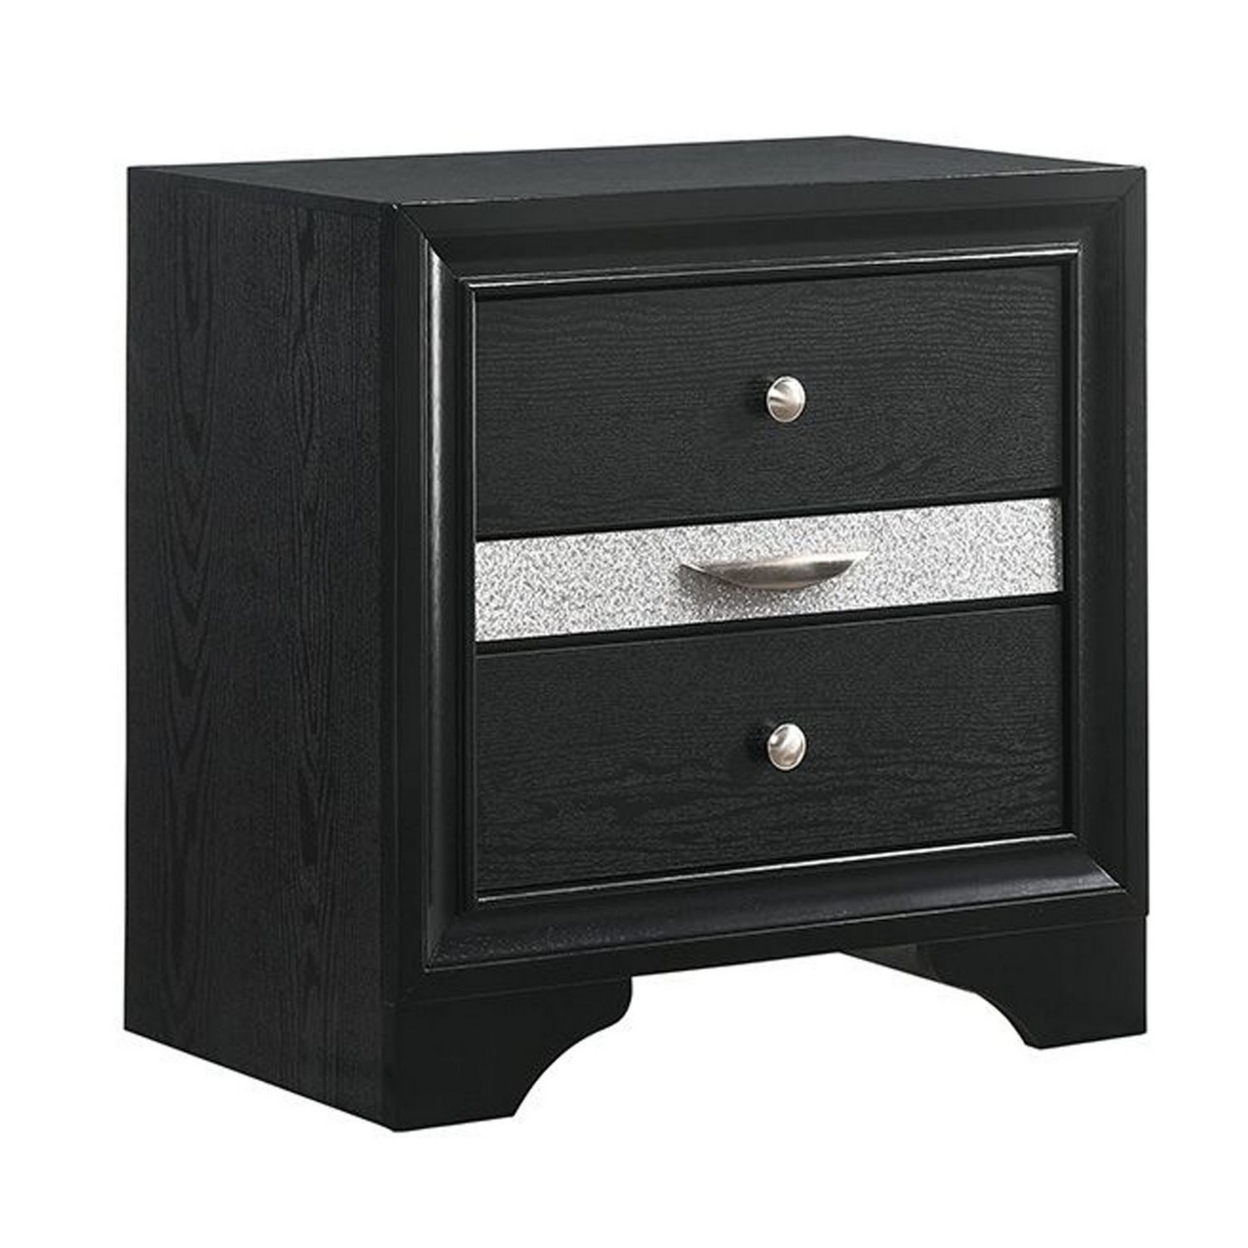 2 Drawer Nightstand With Faux Diamond Front Pull Out Tray, Black- Saltoro Sherpi